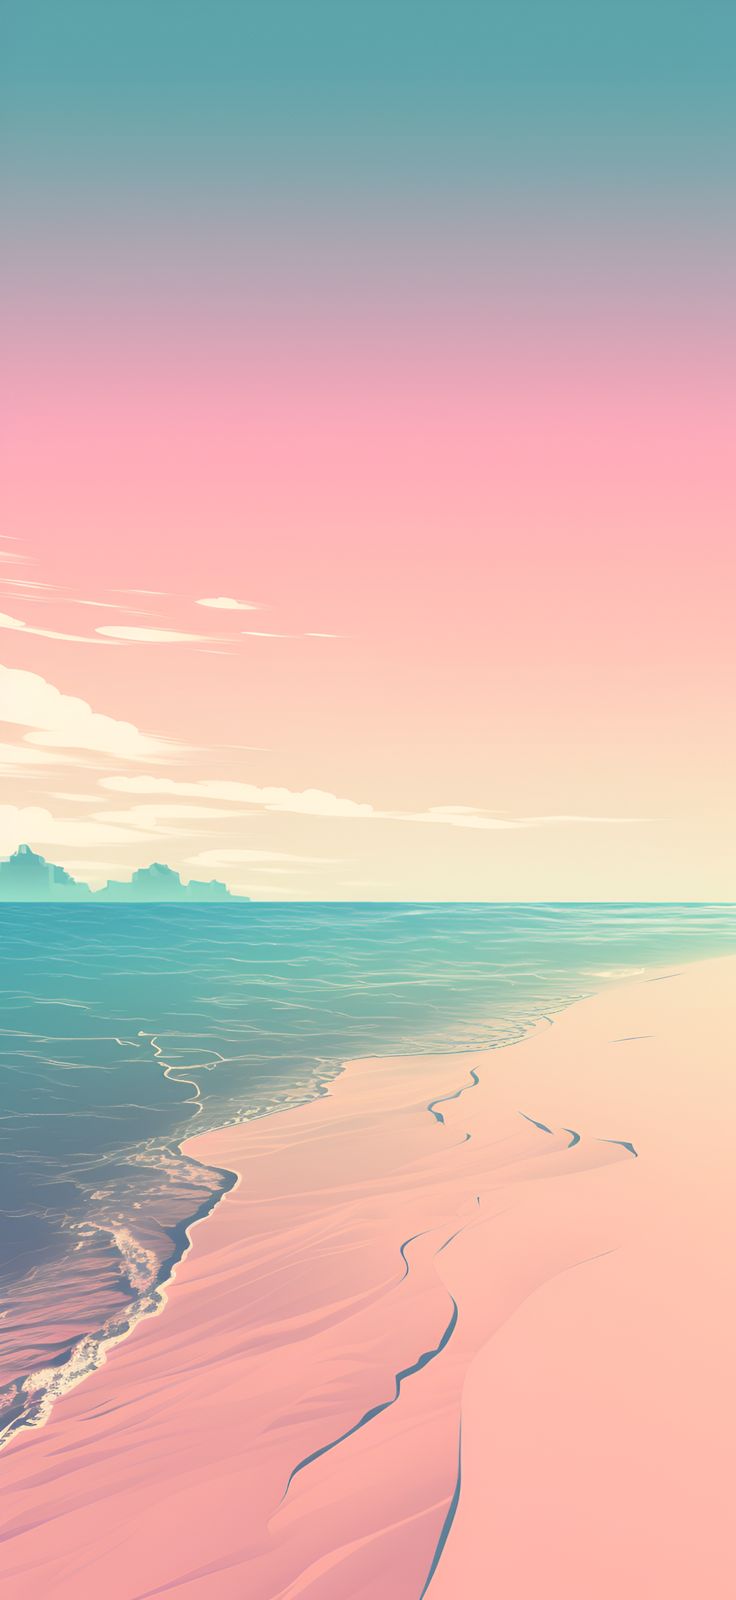 A pink sunset beach with footprints in the sand - Android